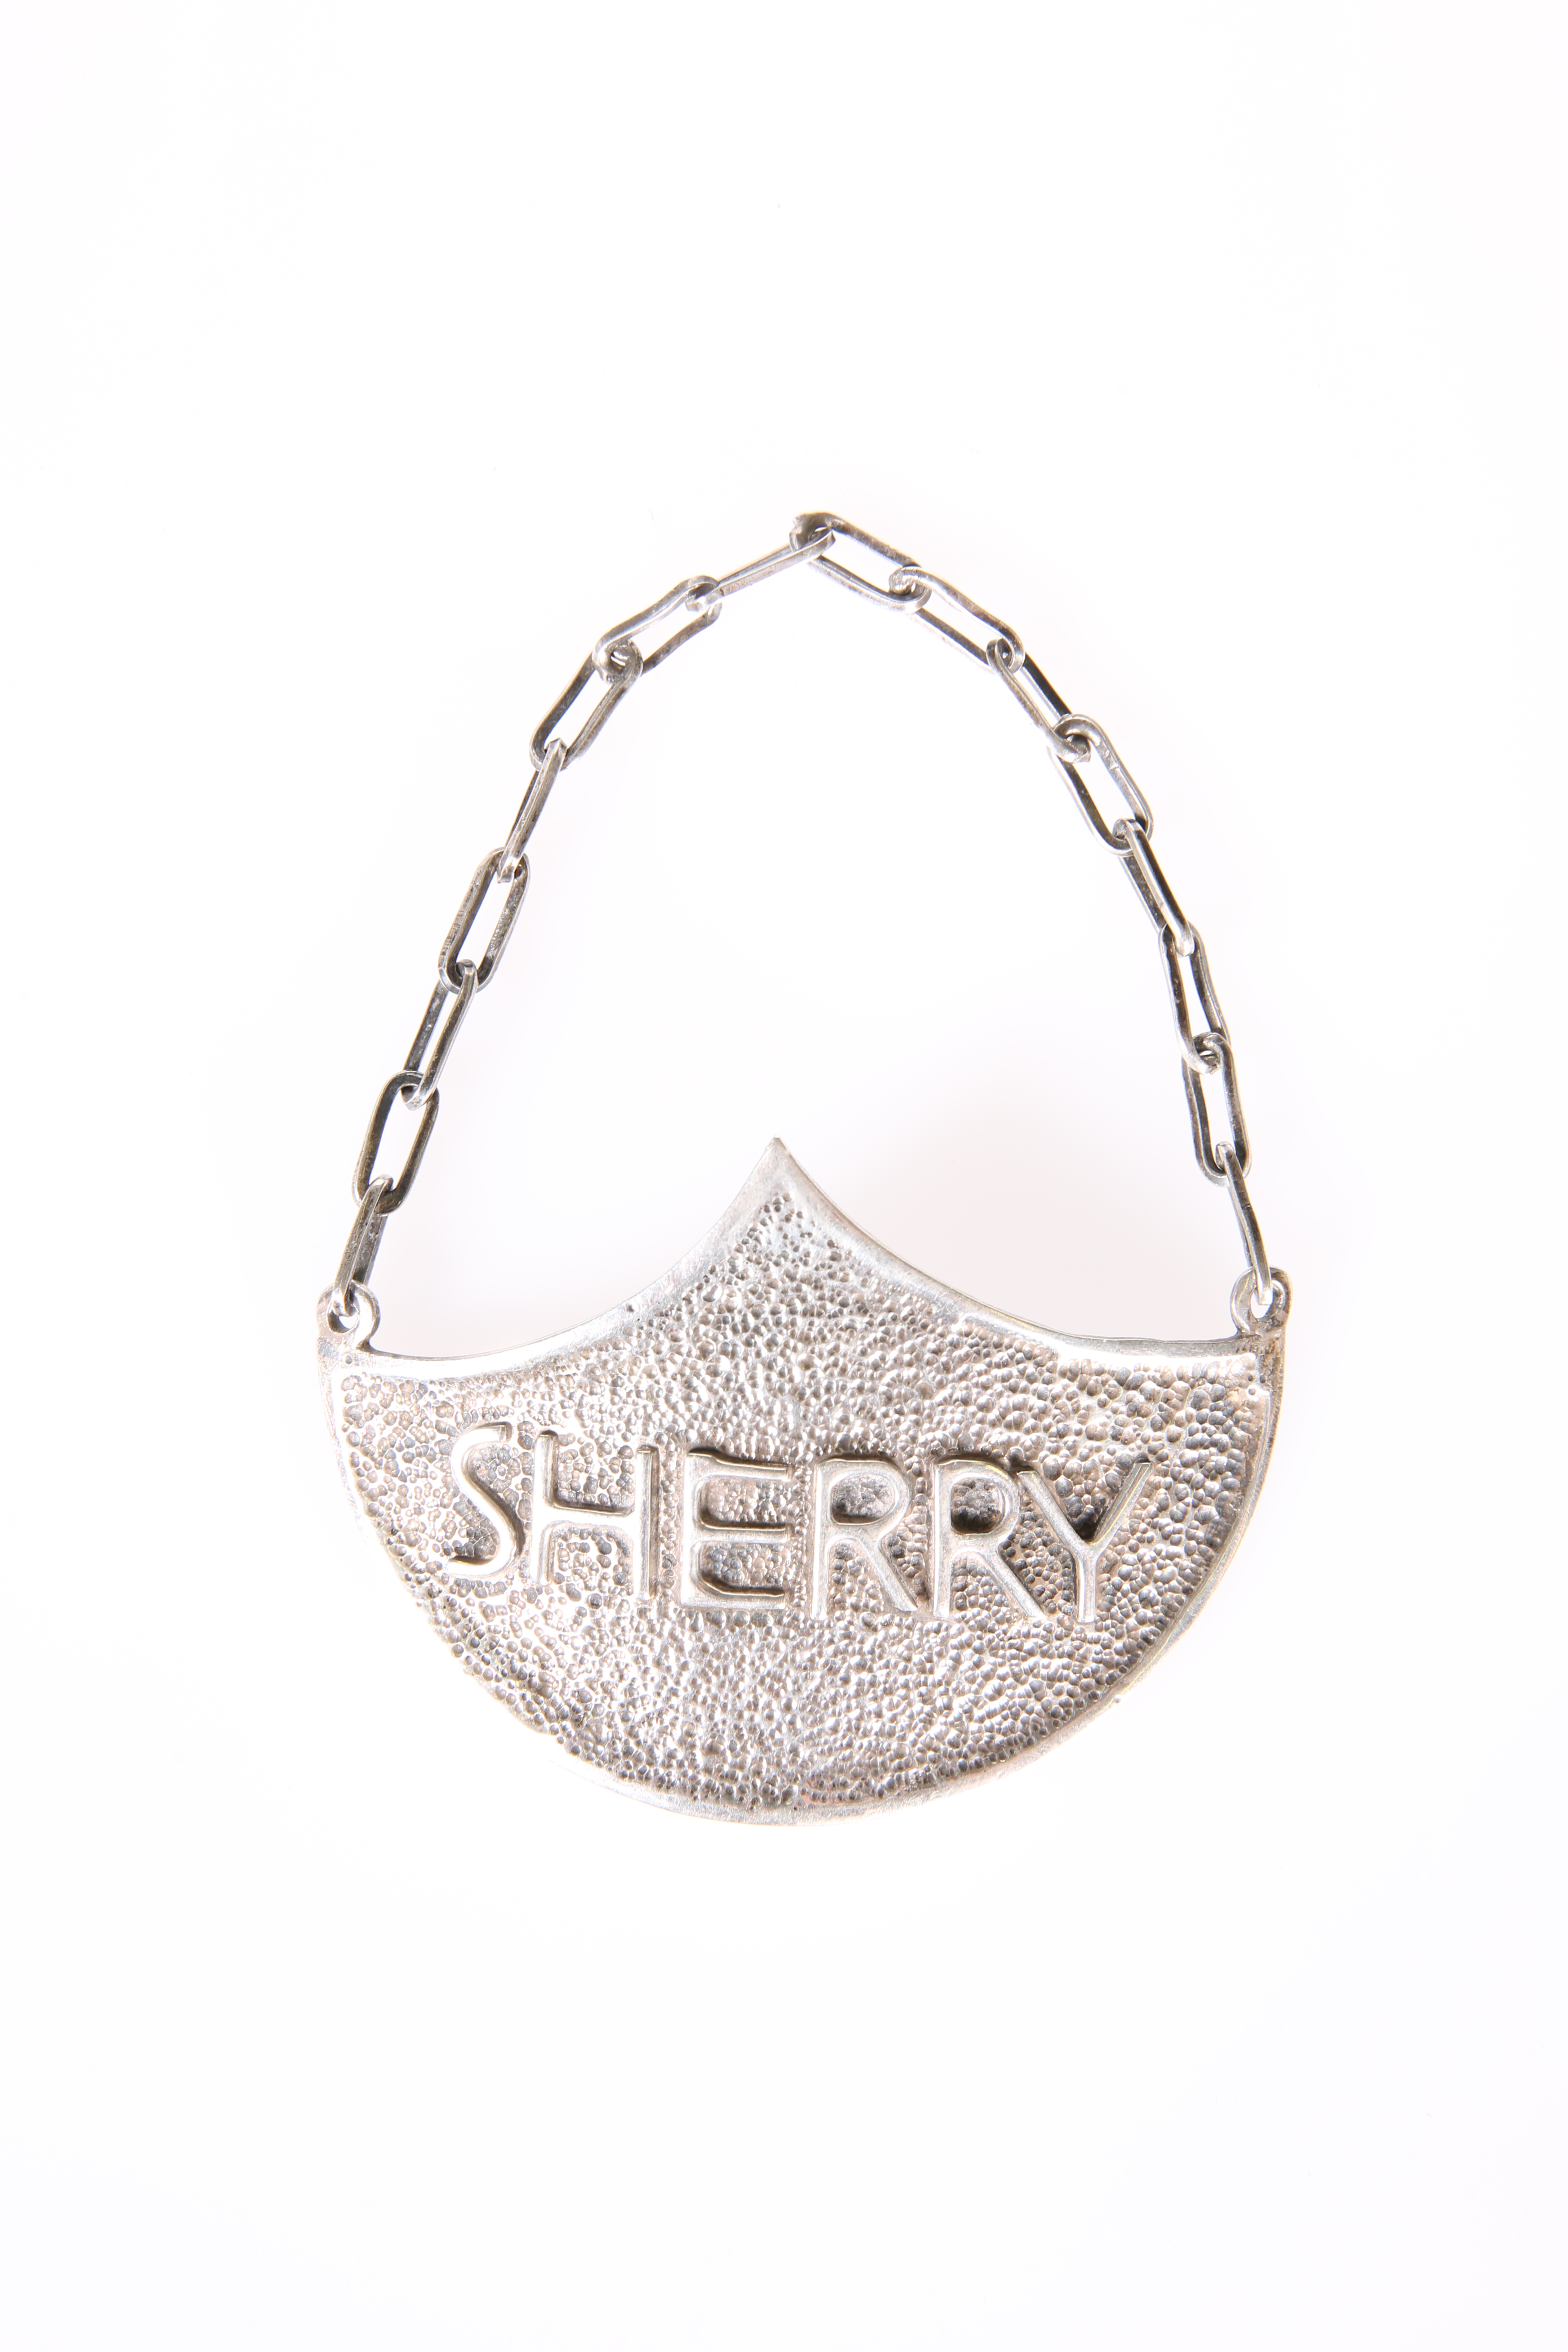 A SILVER DECANTER LABEL, SHERRY, LONDON 1972